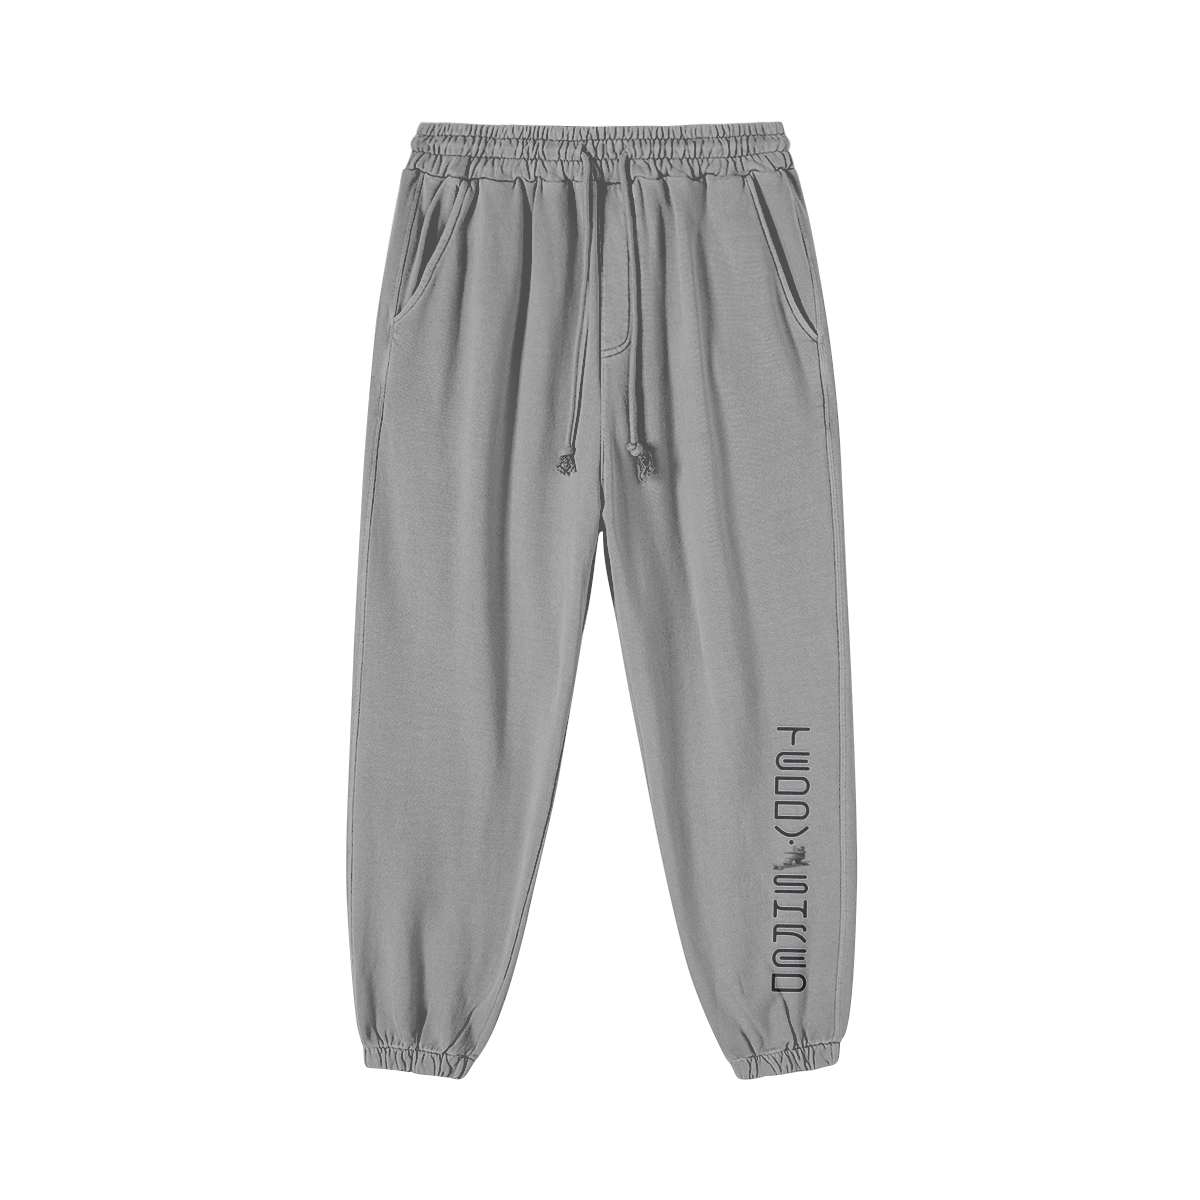 Quick Silver - Teddy Ride Shred 420GSM Unisex Super Heavyweight Washed Baggy Sweatpants - unisex sweatpants at TFC&H Co.